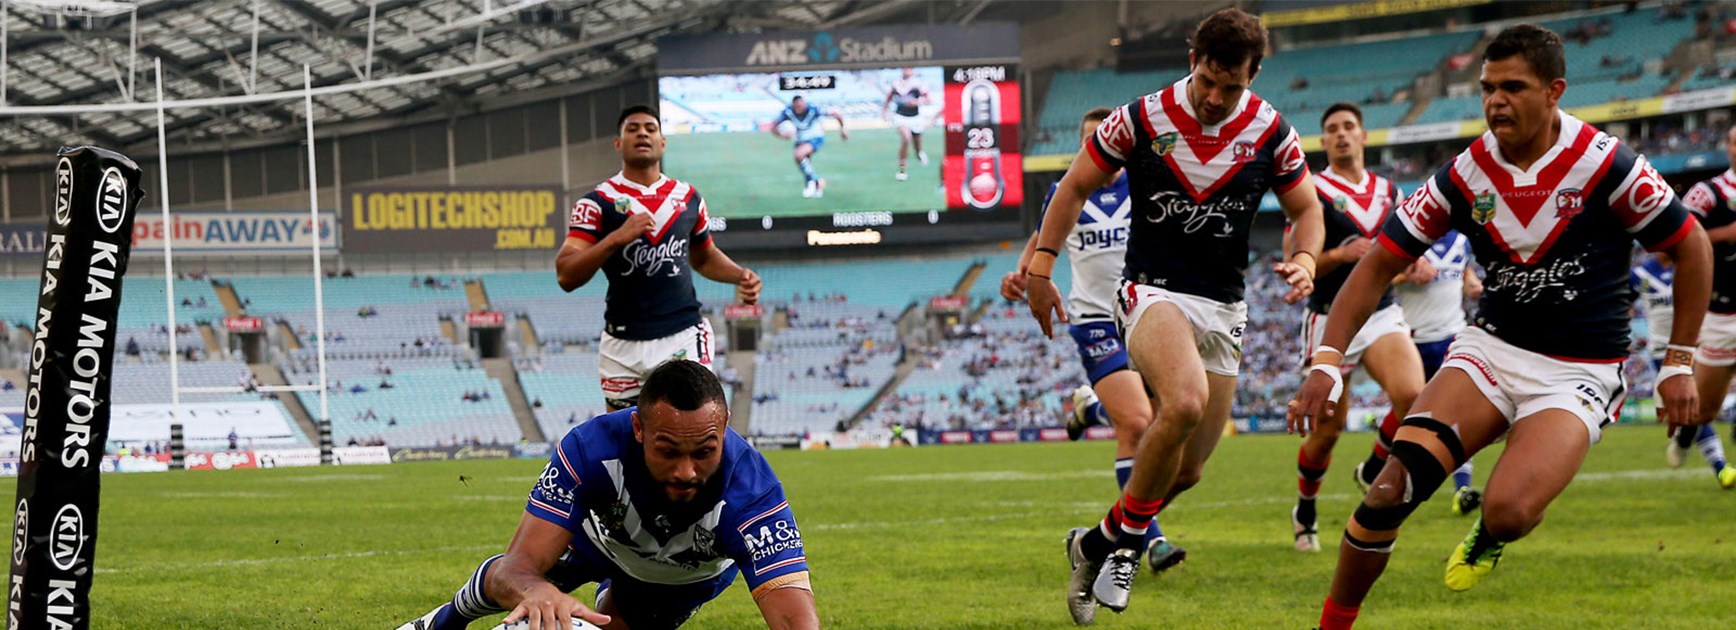 Tyrone Phillips scores for the Bulldogs against the Roosters in Round 11.